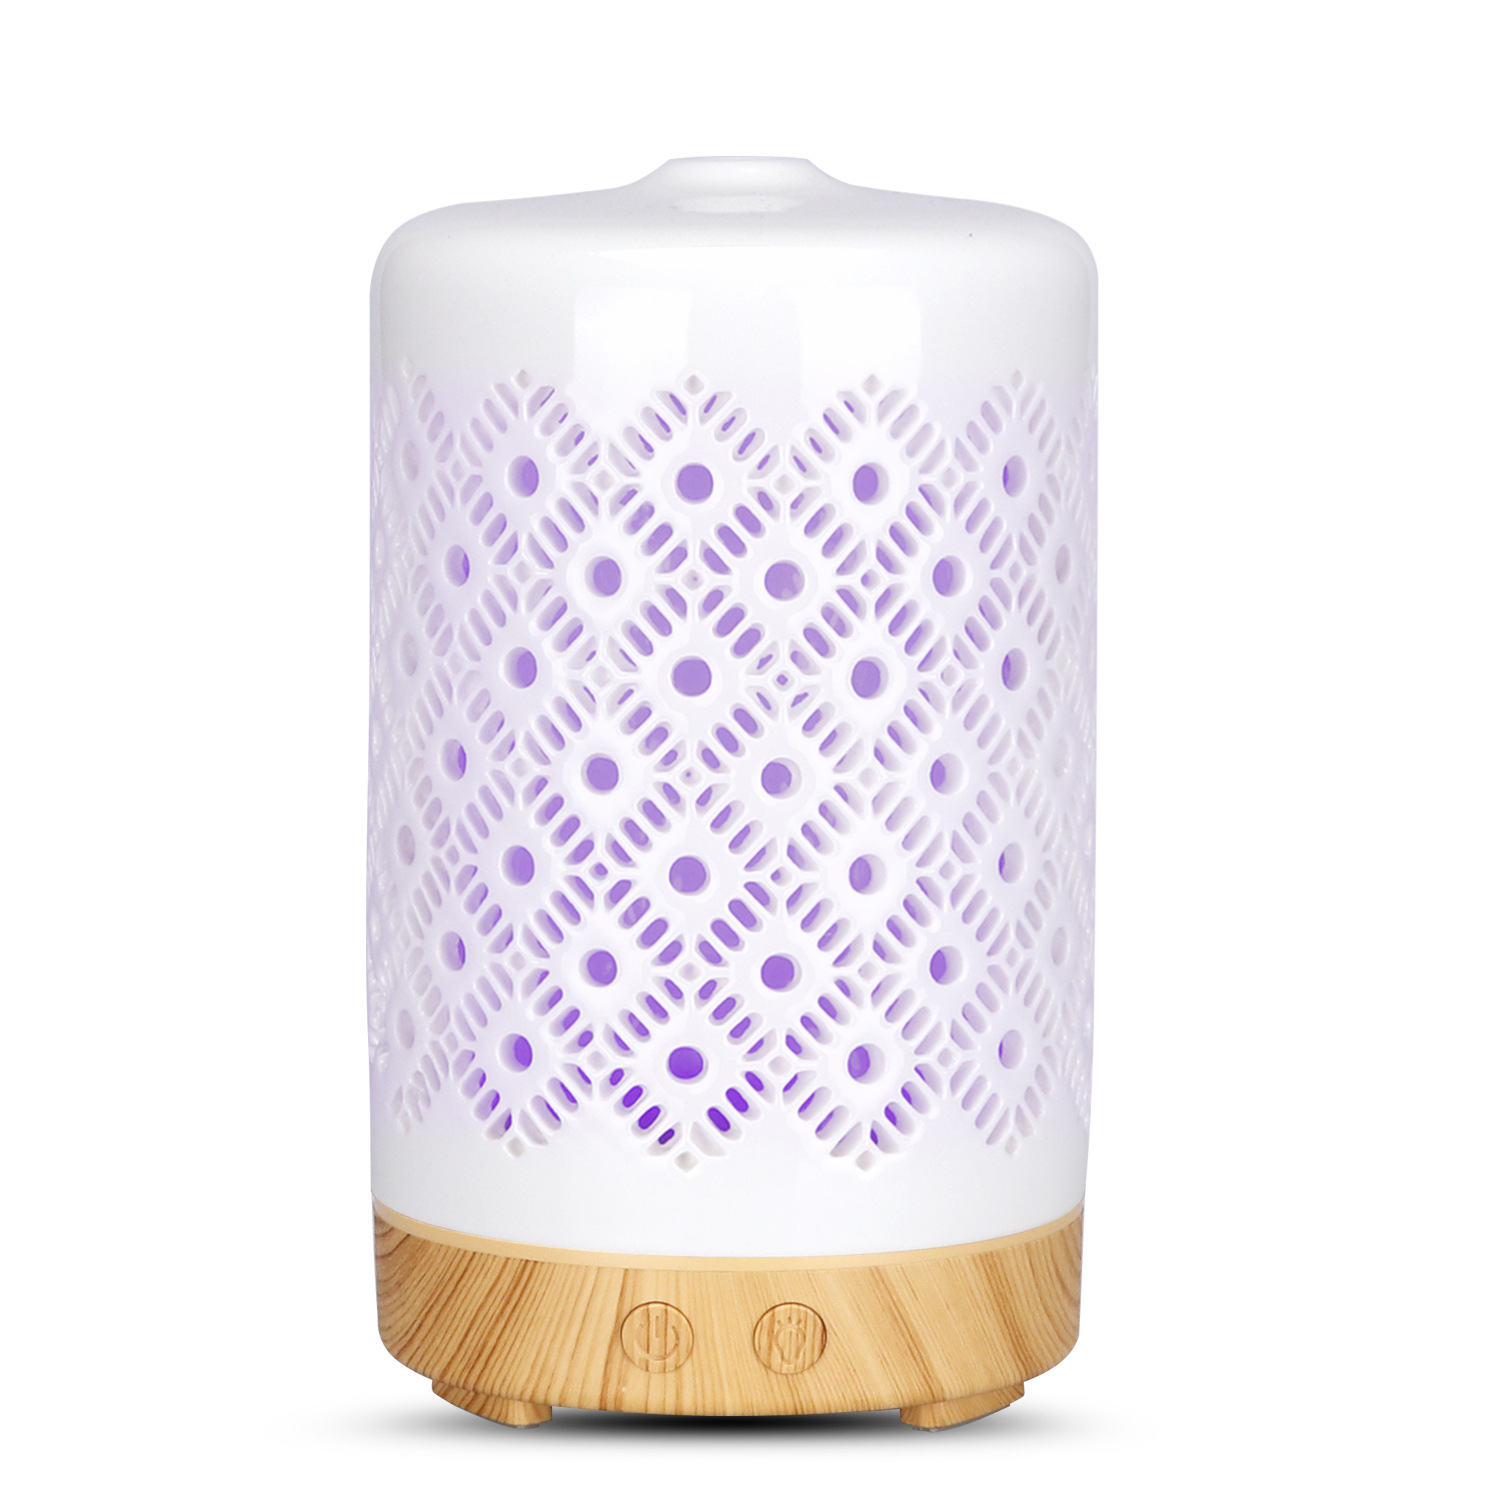 High Quality Cheap Usb Wireless Humidifier. Manufacturers –  White Ceramic Ultrasonic Air Humidifier 100ml Aroma Essential Oil Diffuser – Getter